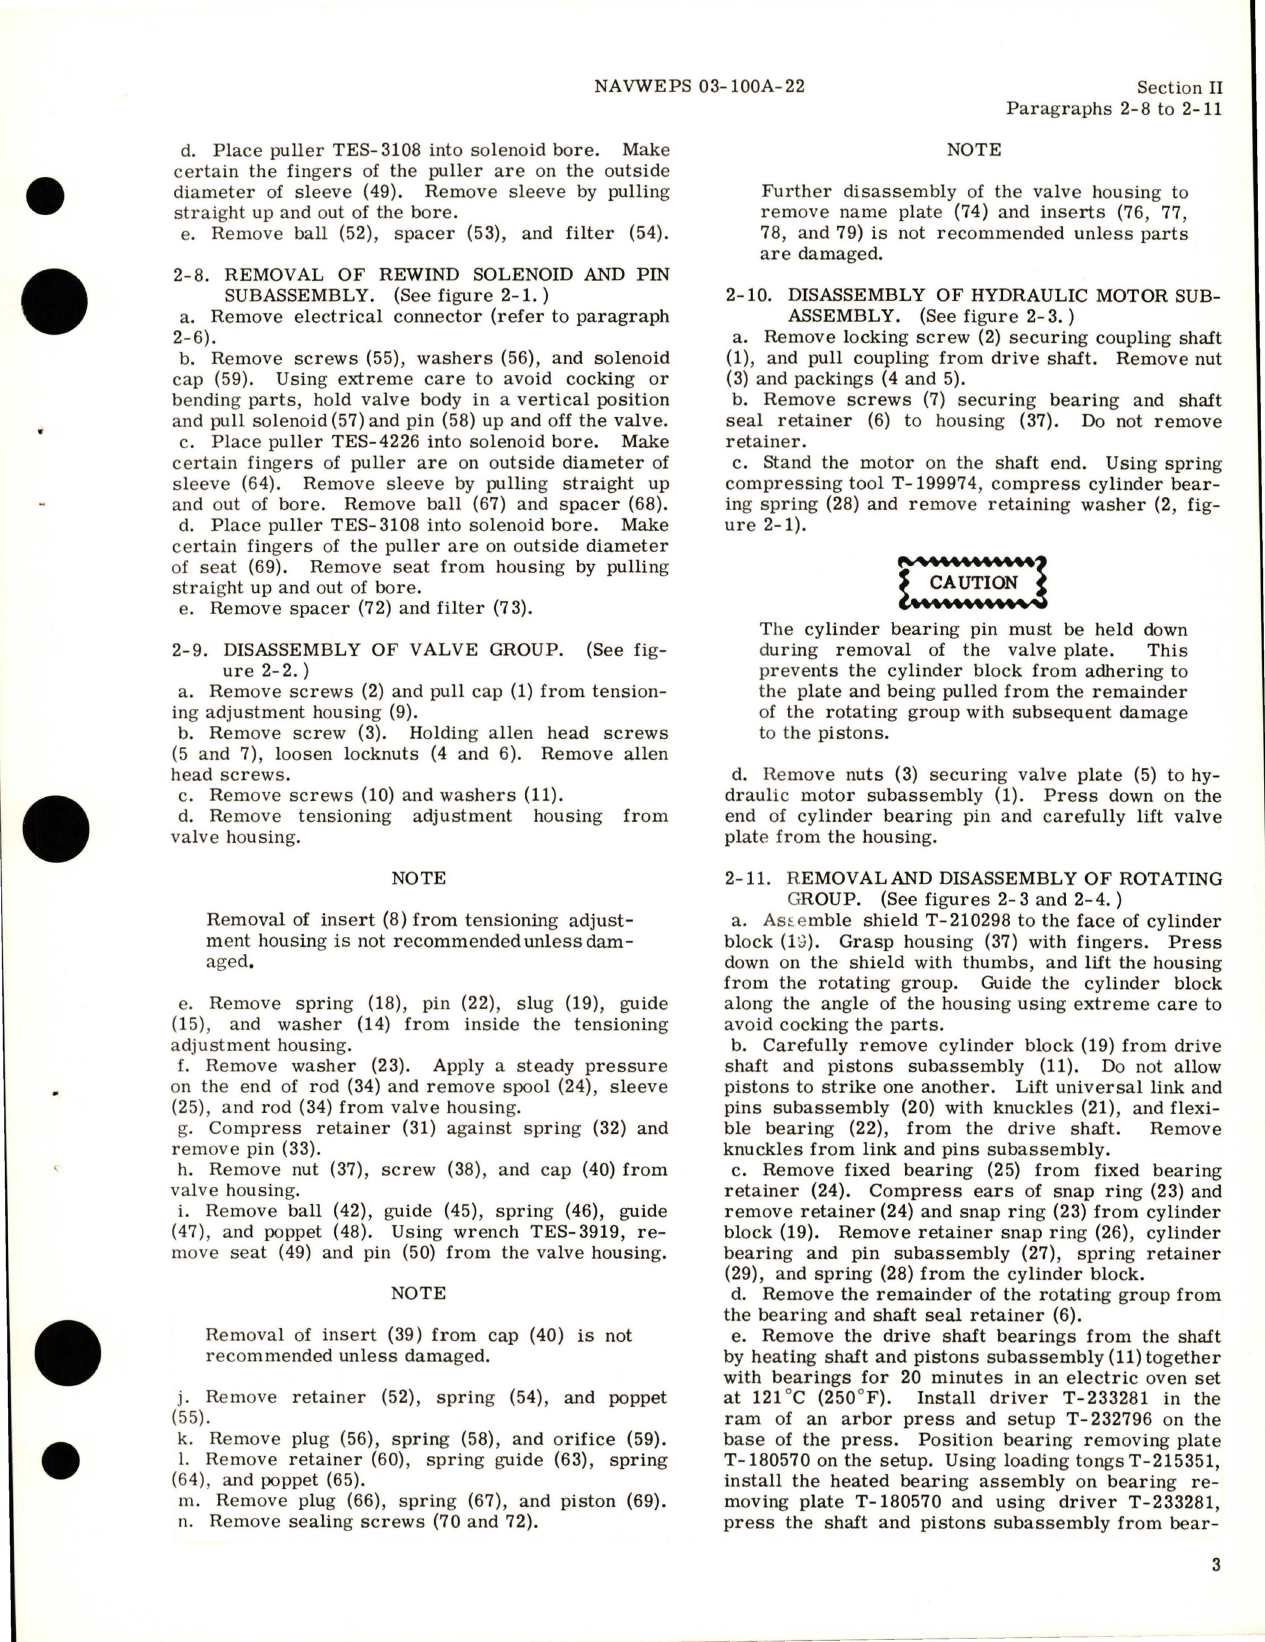 Sample page 7 from AirCorps Library document: Overhaul Instructions for Hydraulic Drive Hose Reel - Model EA-50220, EA-50238 